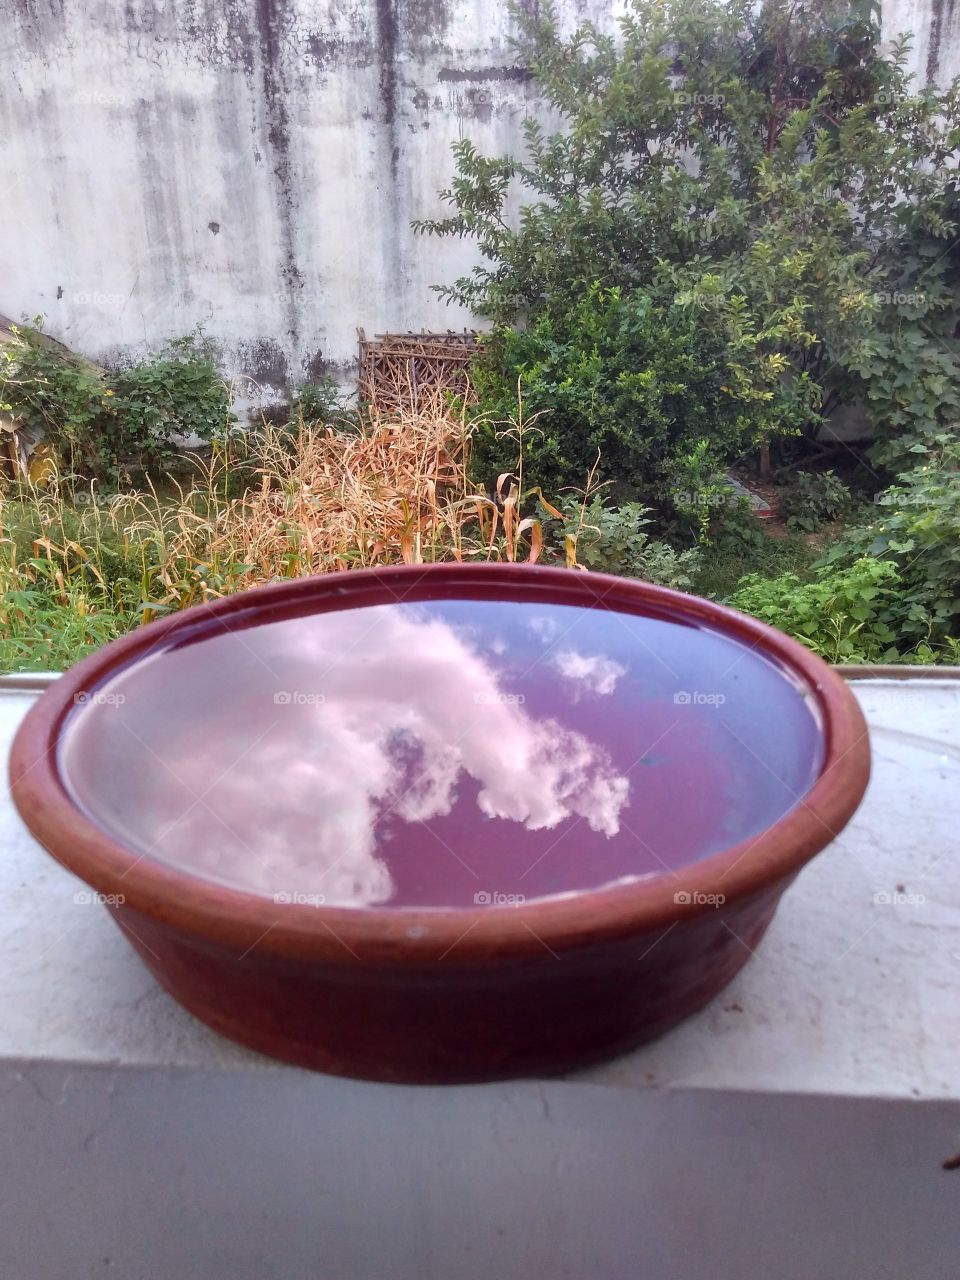 creative, whole sky is in one bowl, beautiful, RGB